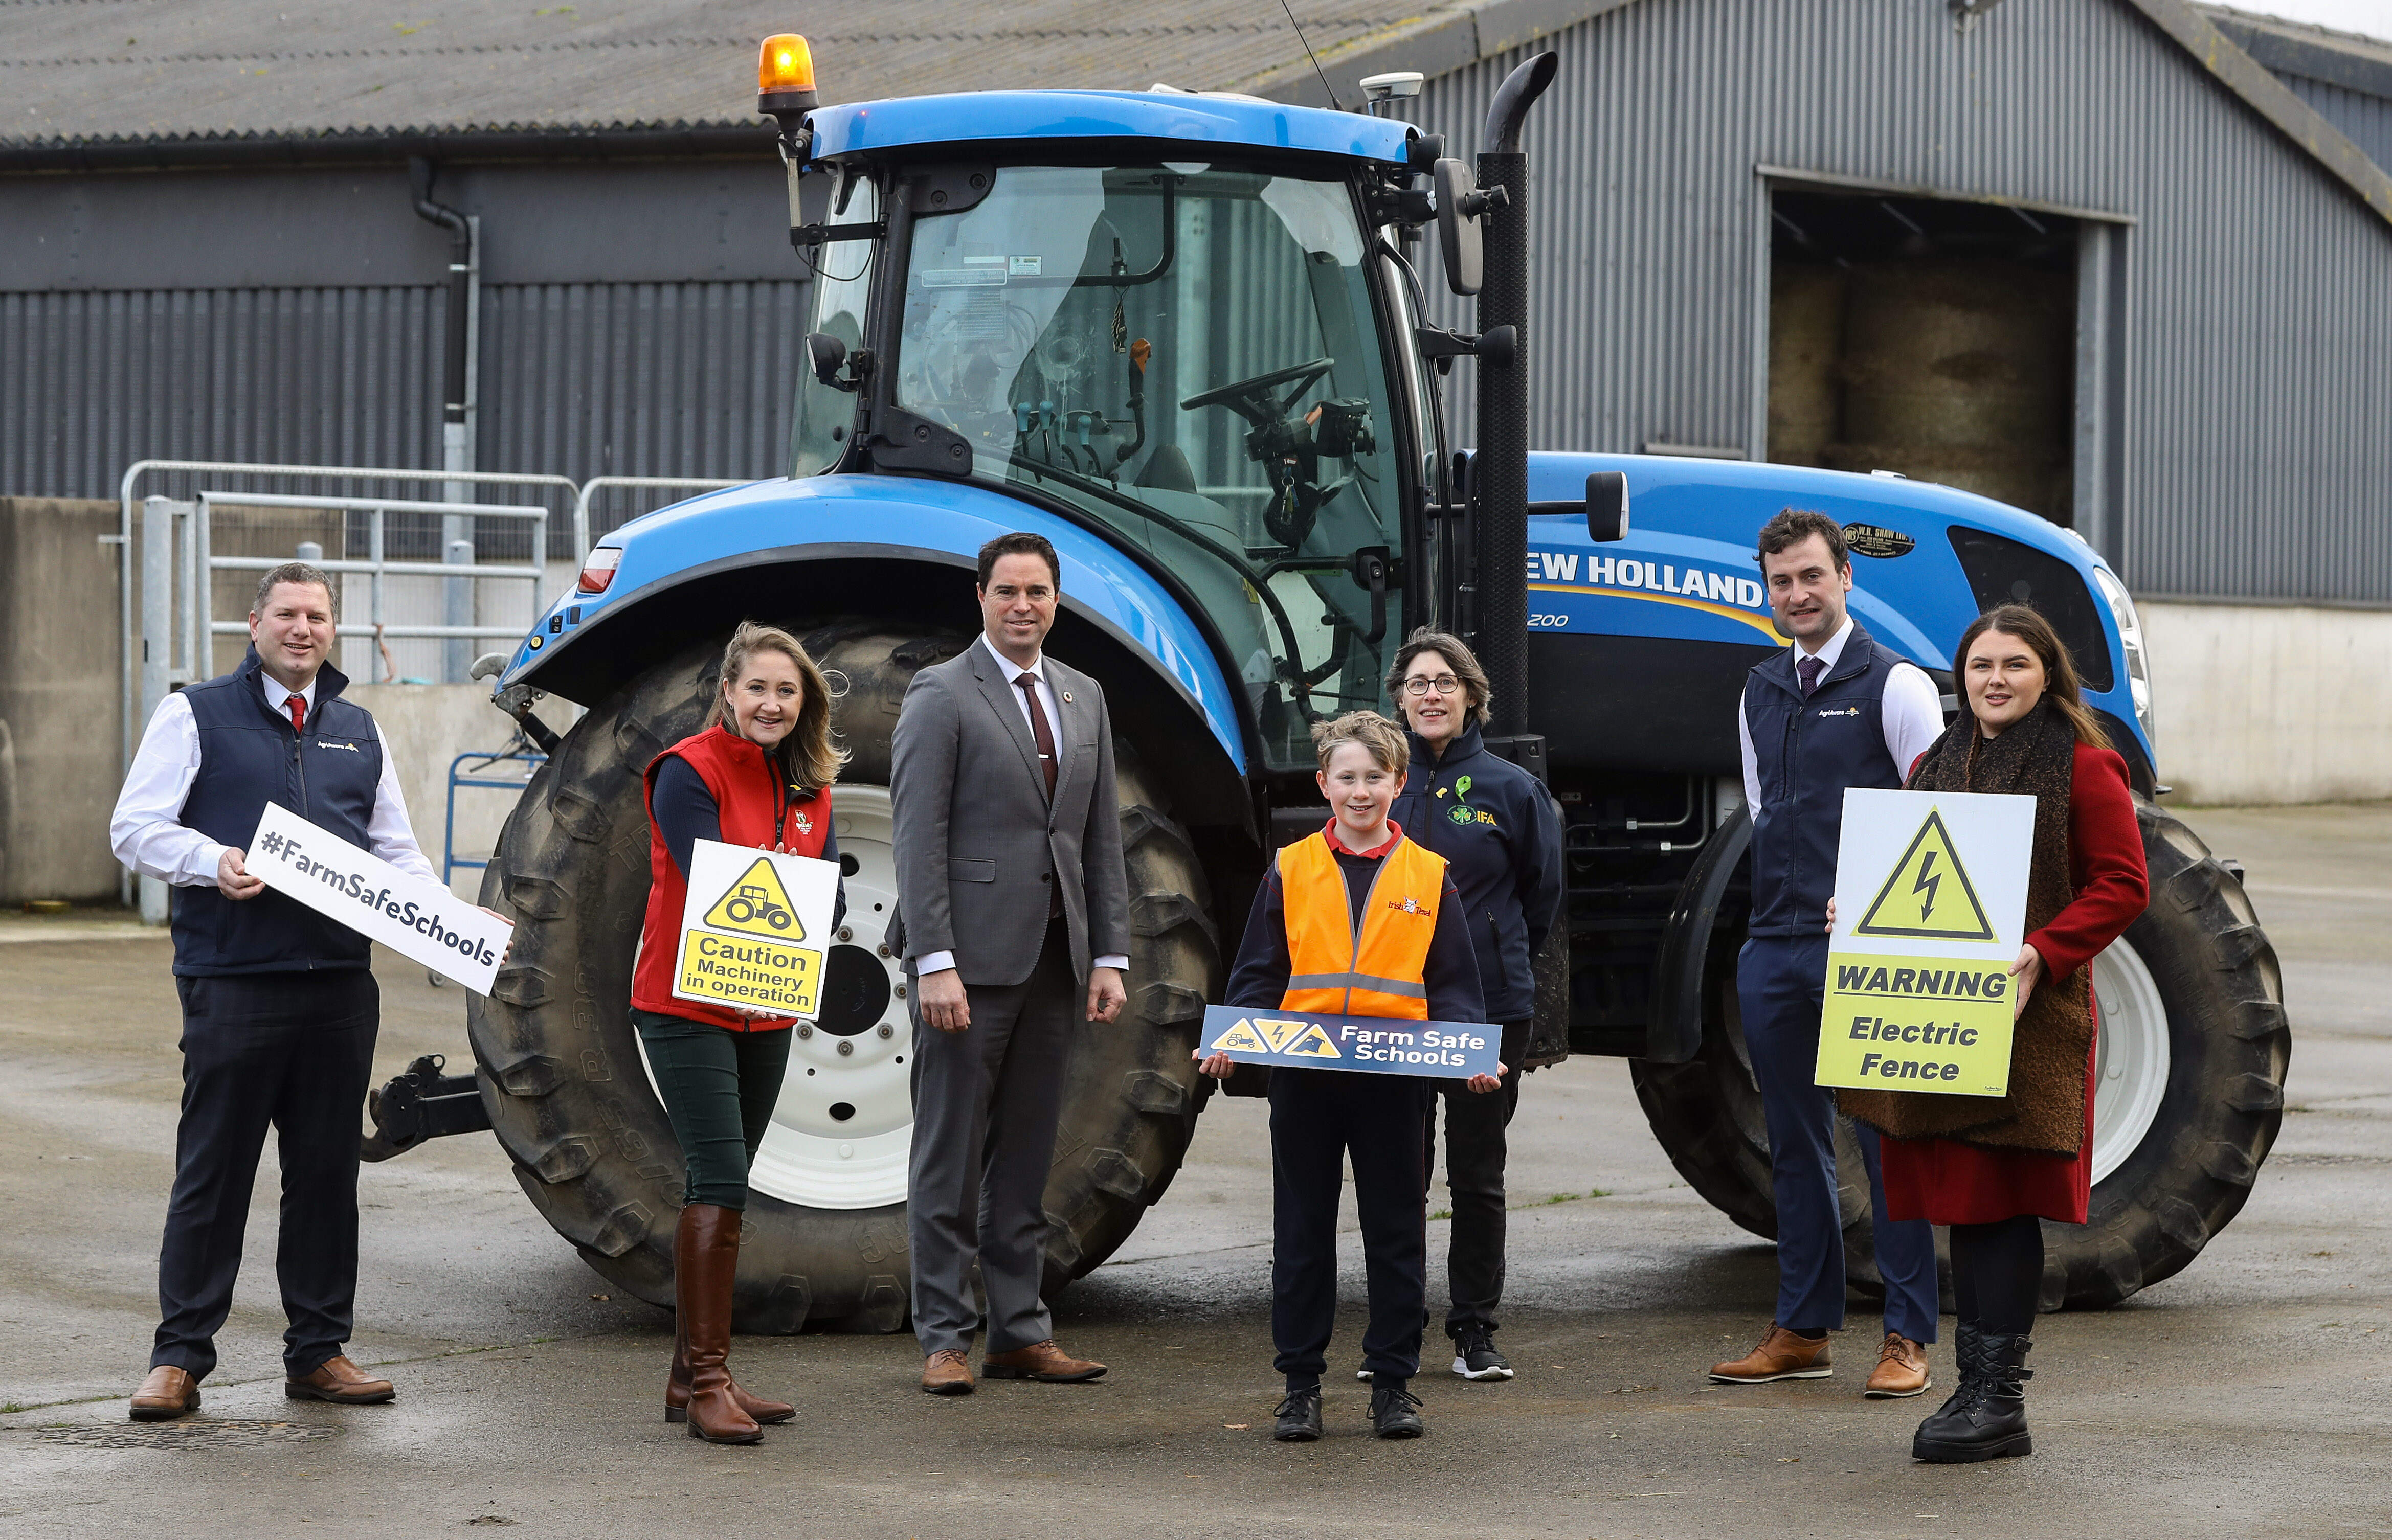 Farm Safe School 22 is launched